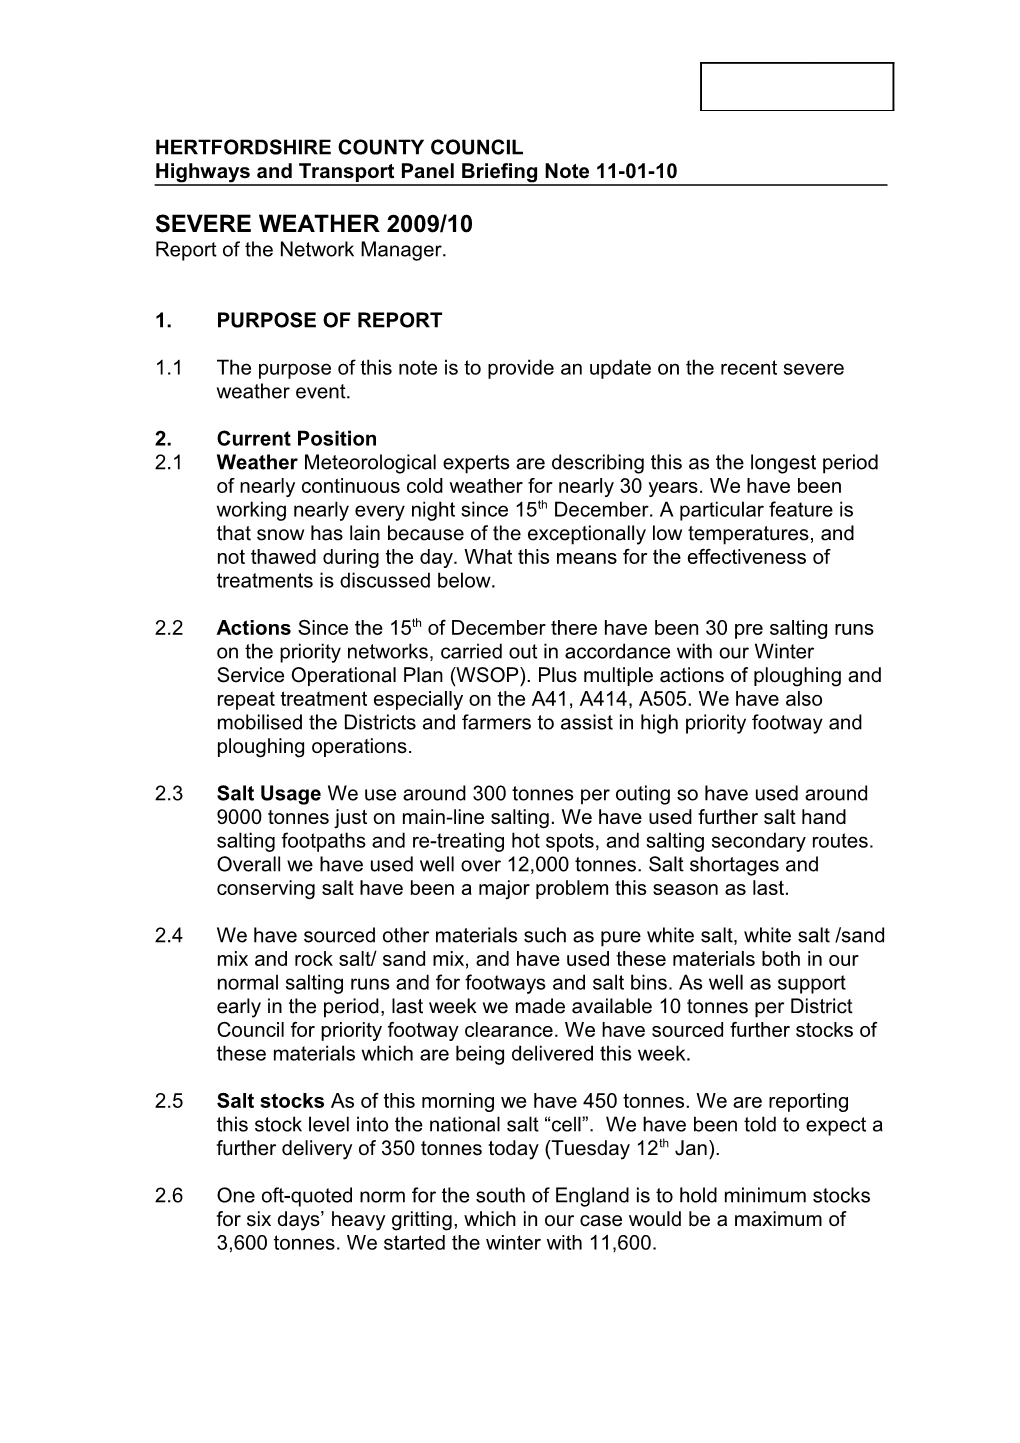 Highways and Transport Panel Briefing Note 11-01-10